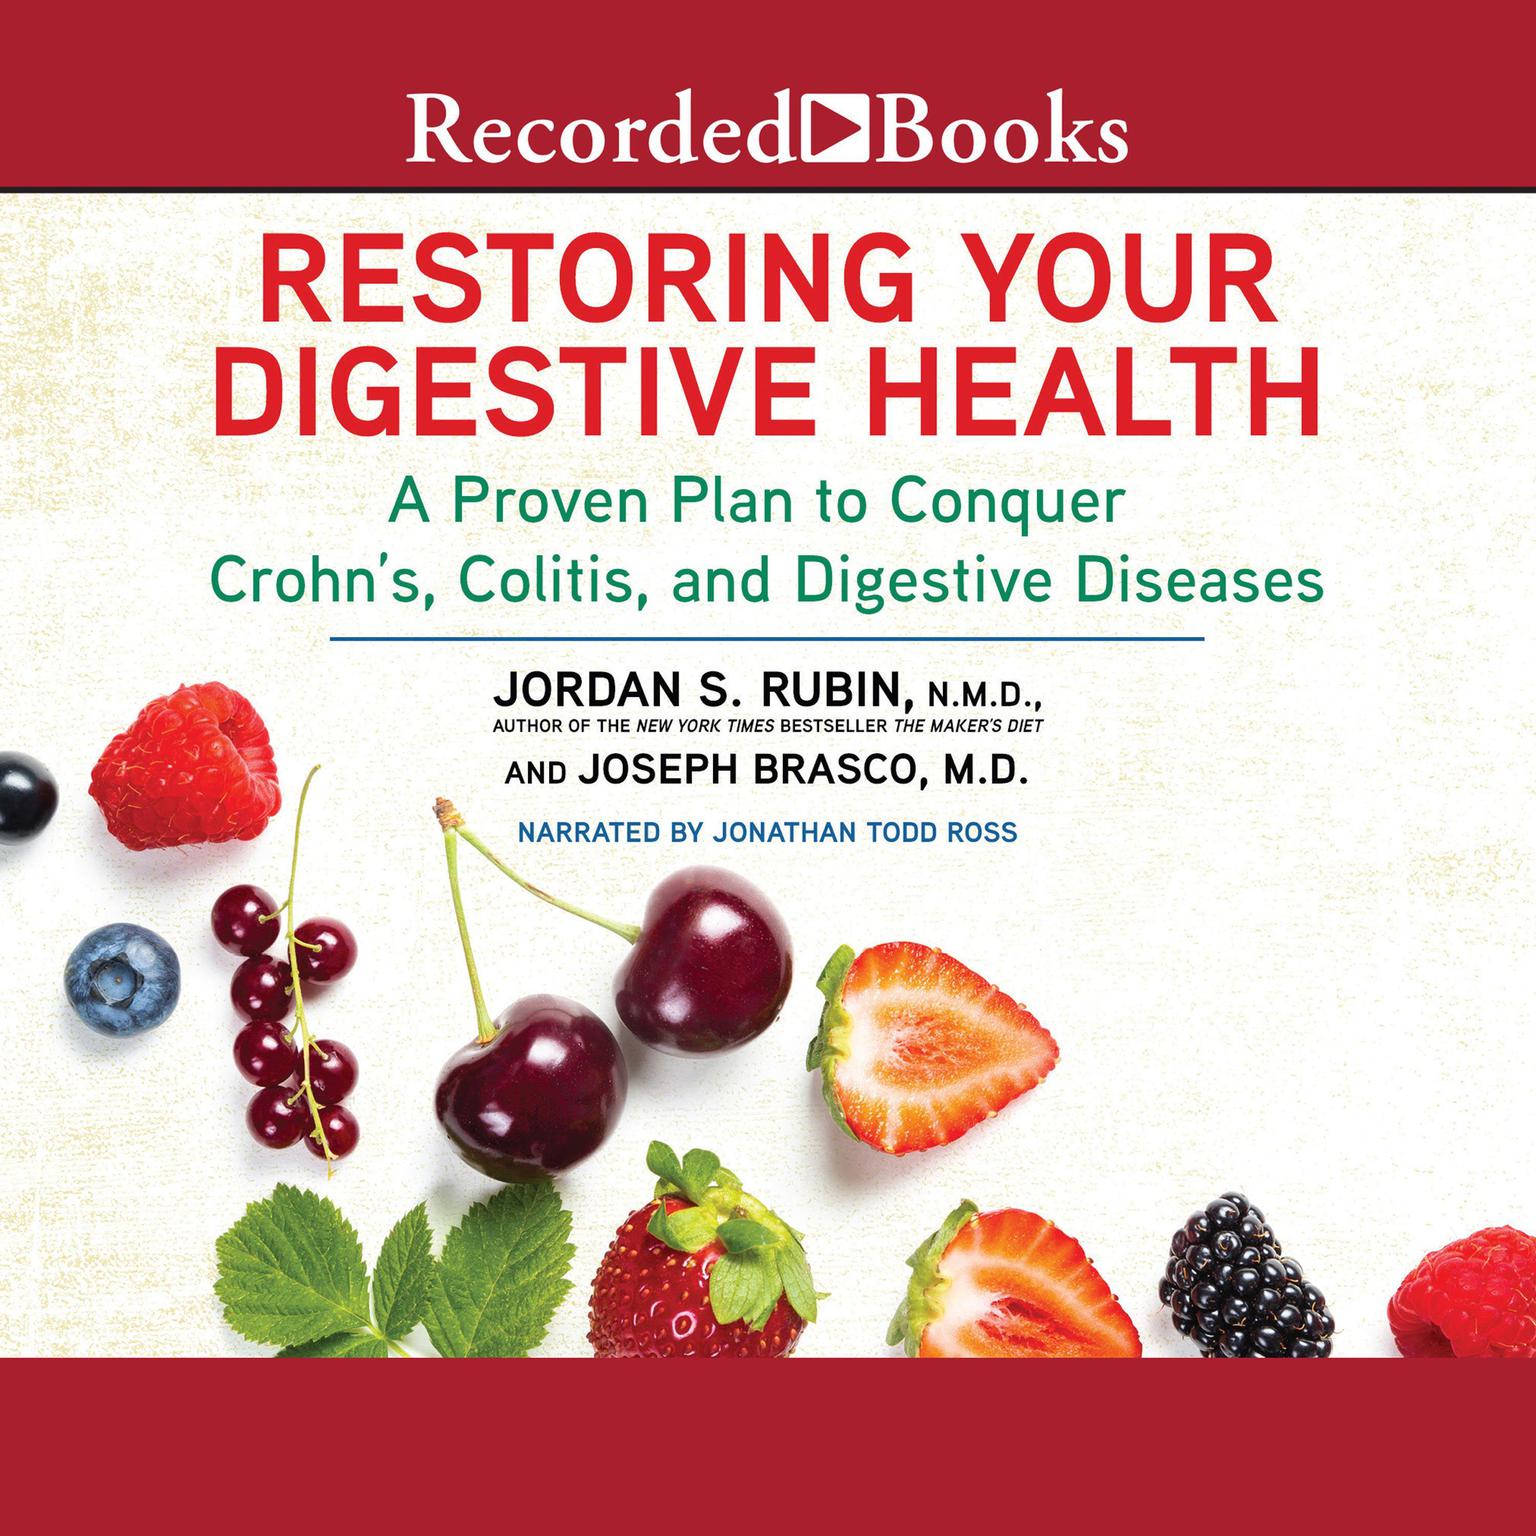 Restoring Your Digestive Health: A Proven Plan to Conquer Crohns, Colitis, and Digestive Diseases Audiobook, by Jordan S. Rubin